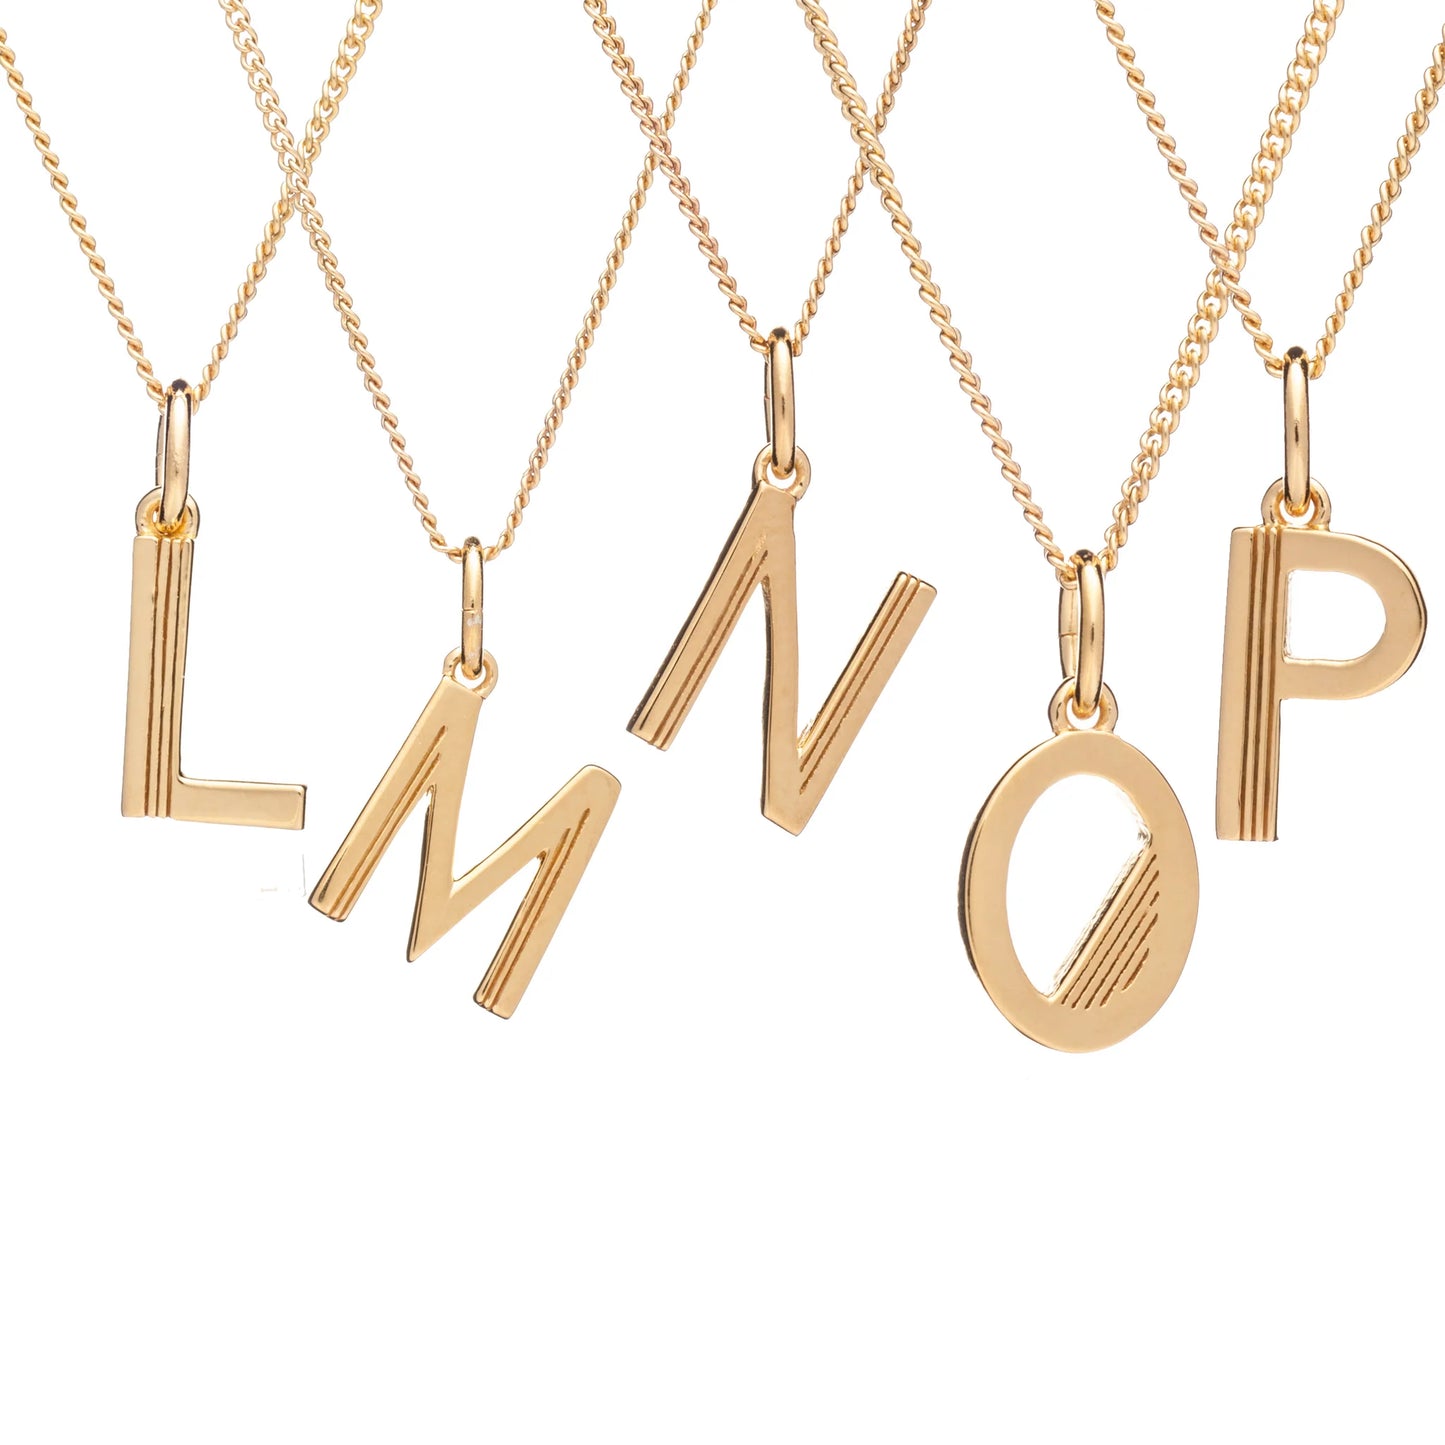 Rachel Jackson Sterling Silver Yellow Gold Initial Necklace: Letter N